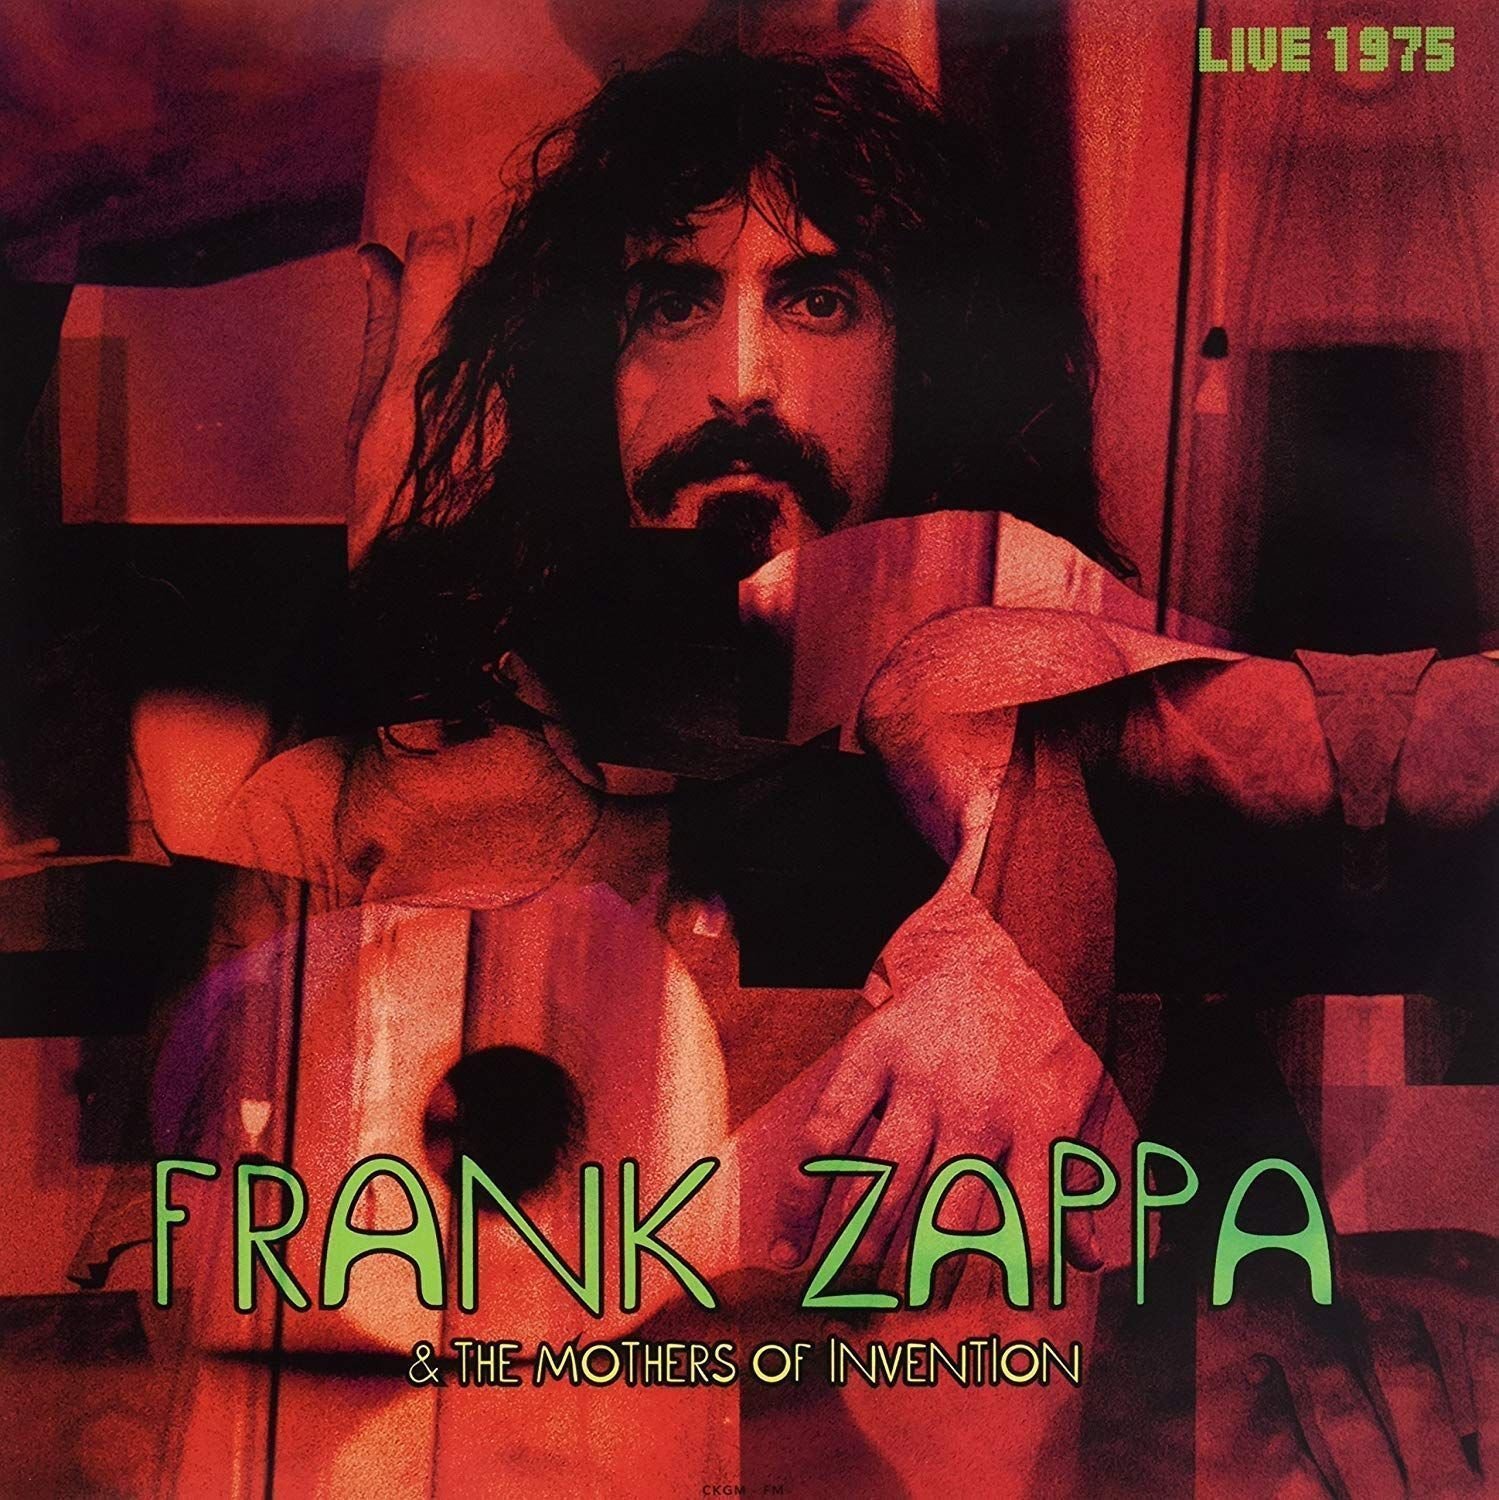 Disque vinyle Frank Zappa - Live 1975 (Frank Zappa & The Mothers Of Invention) (2 LP)